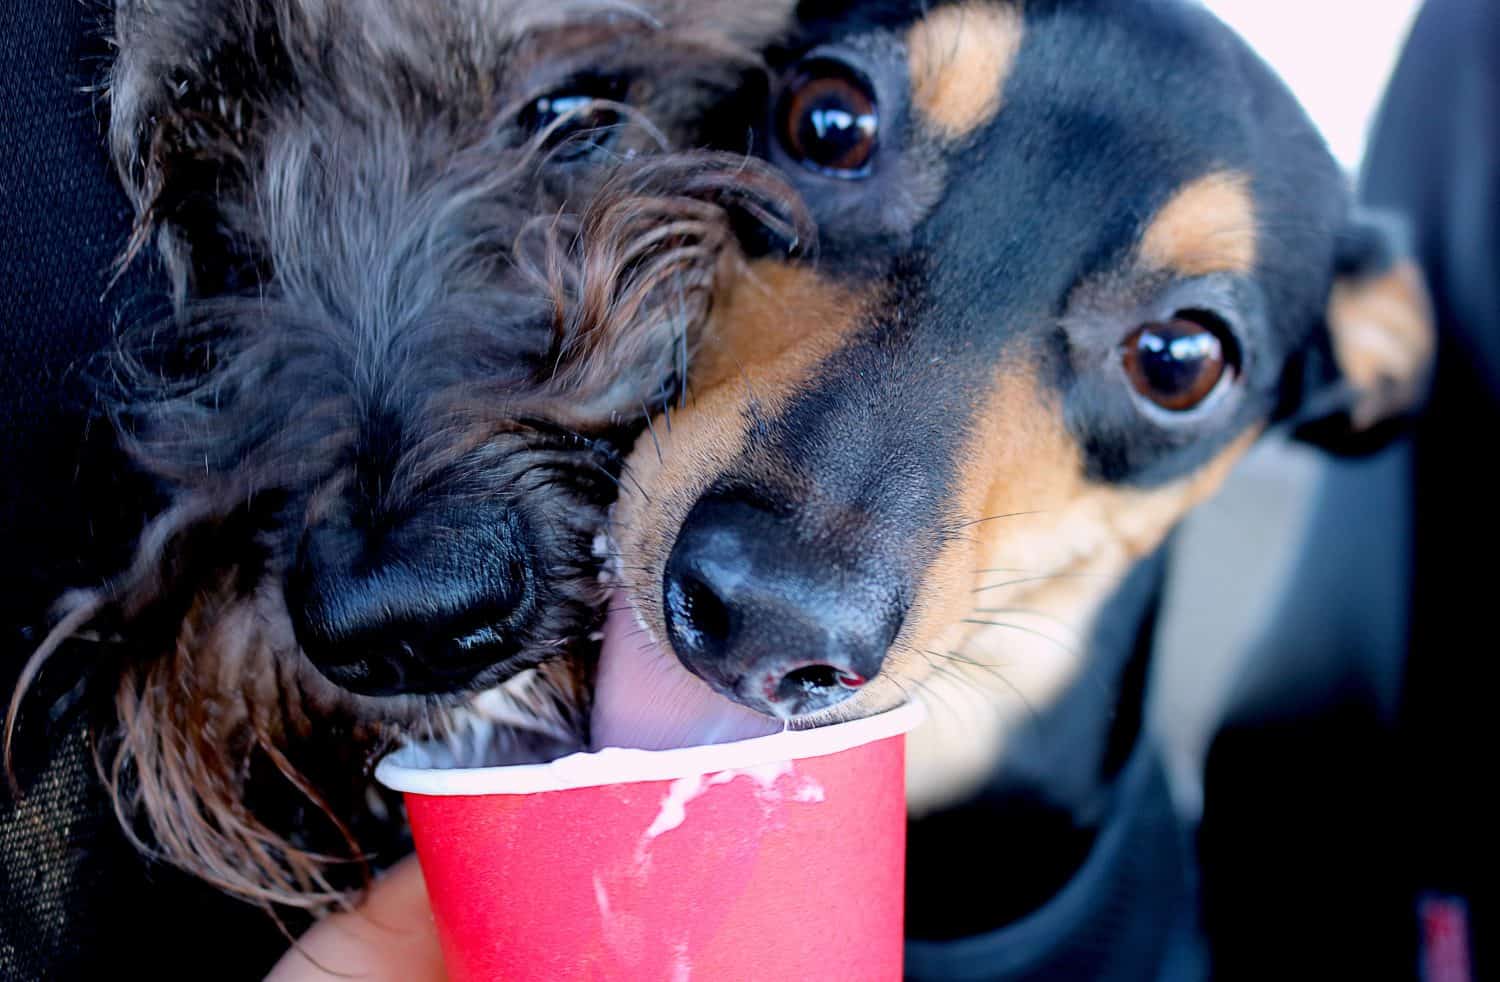 Schnauzer and Jack Russel Terrier Licking Whipped Cream out of a Red Cup; happy and sharing a treat together; teamwork